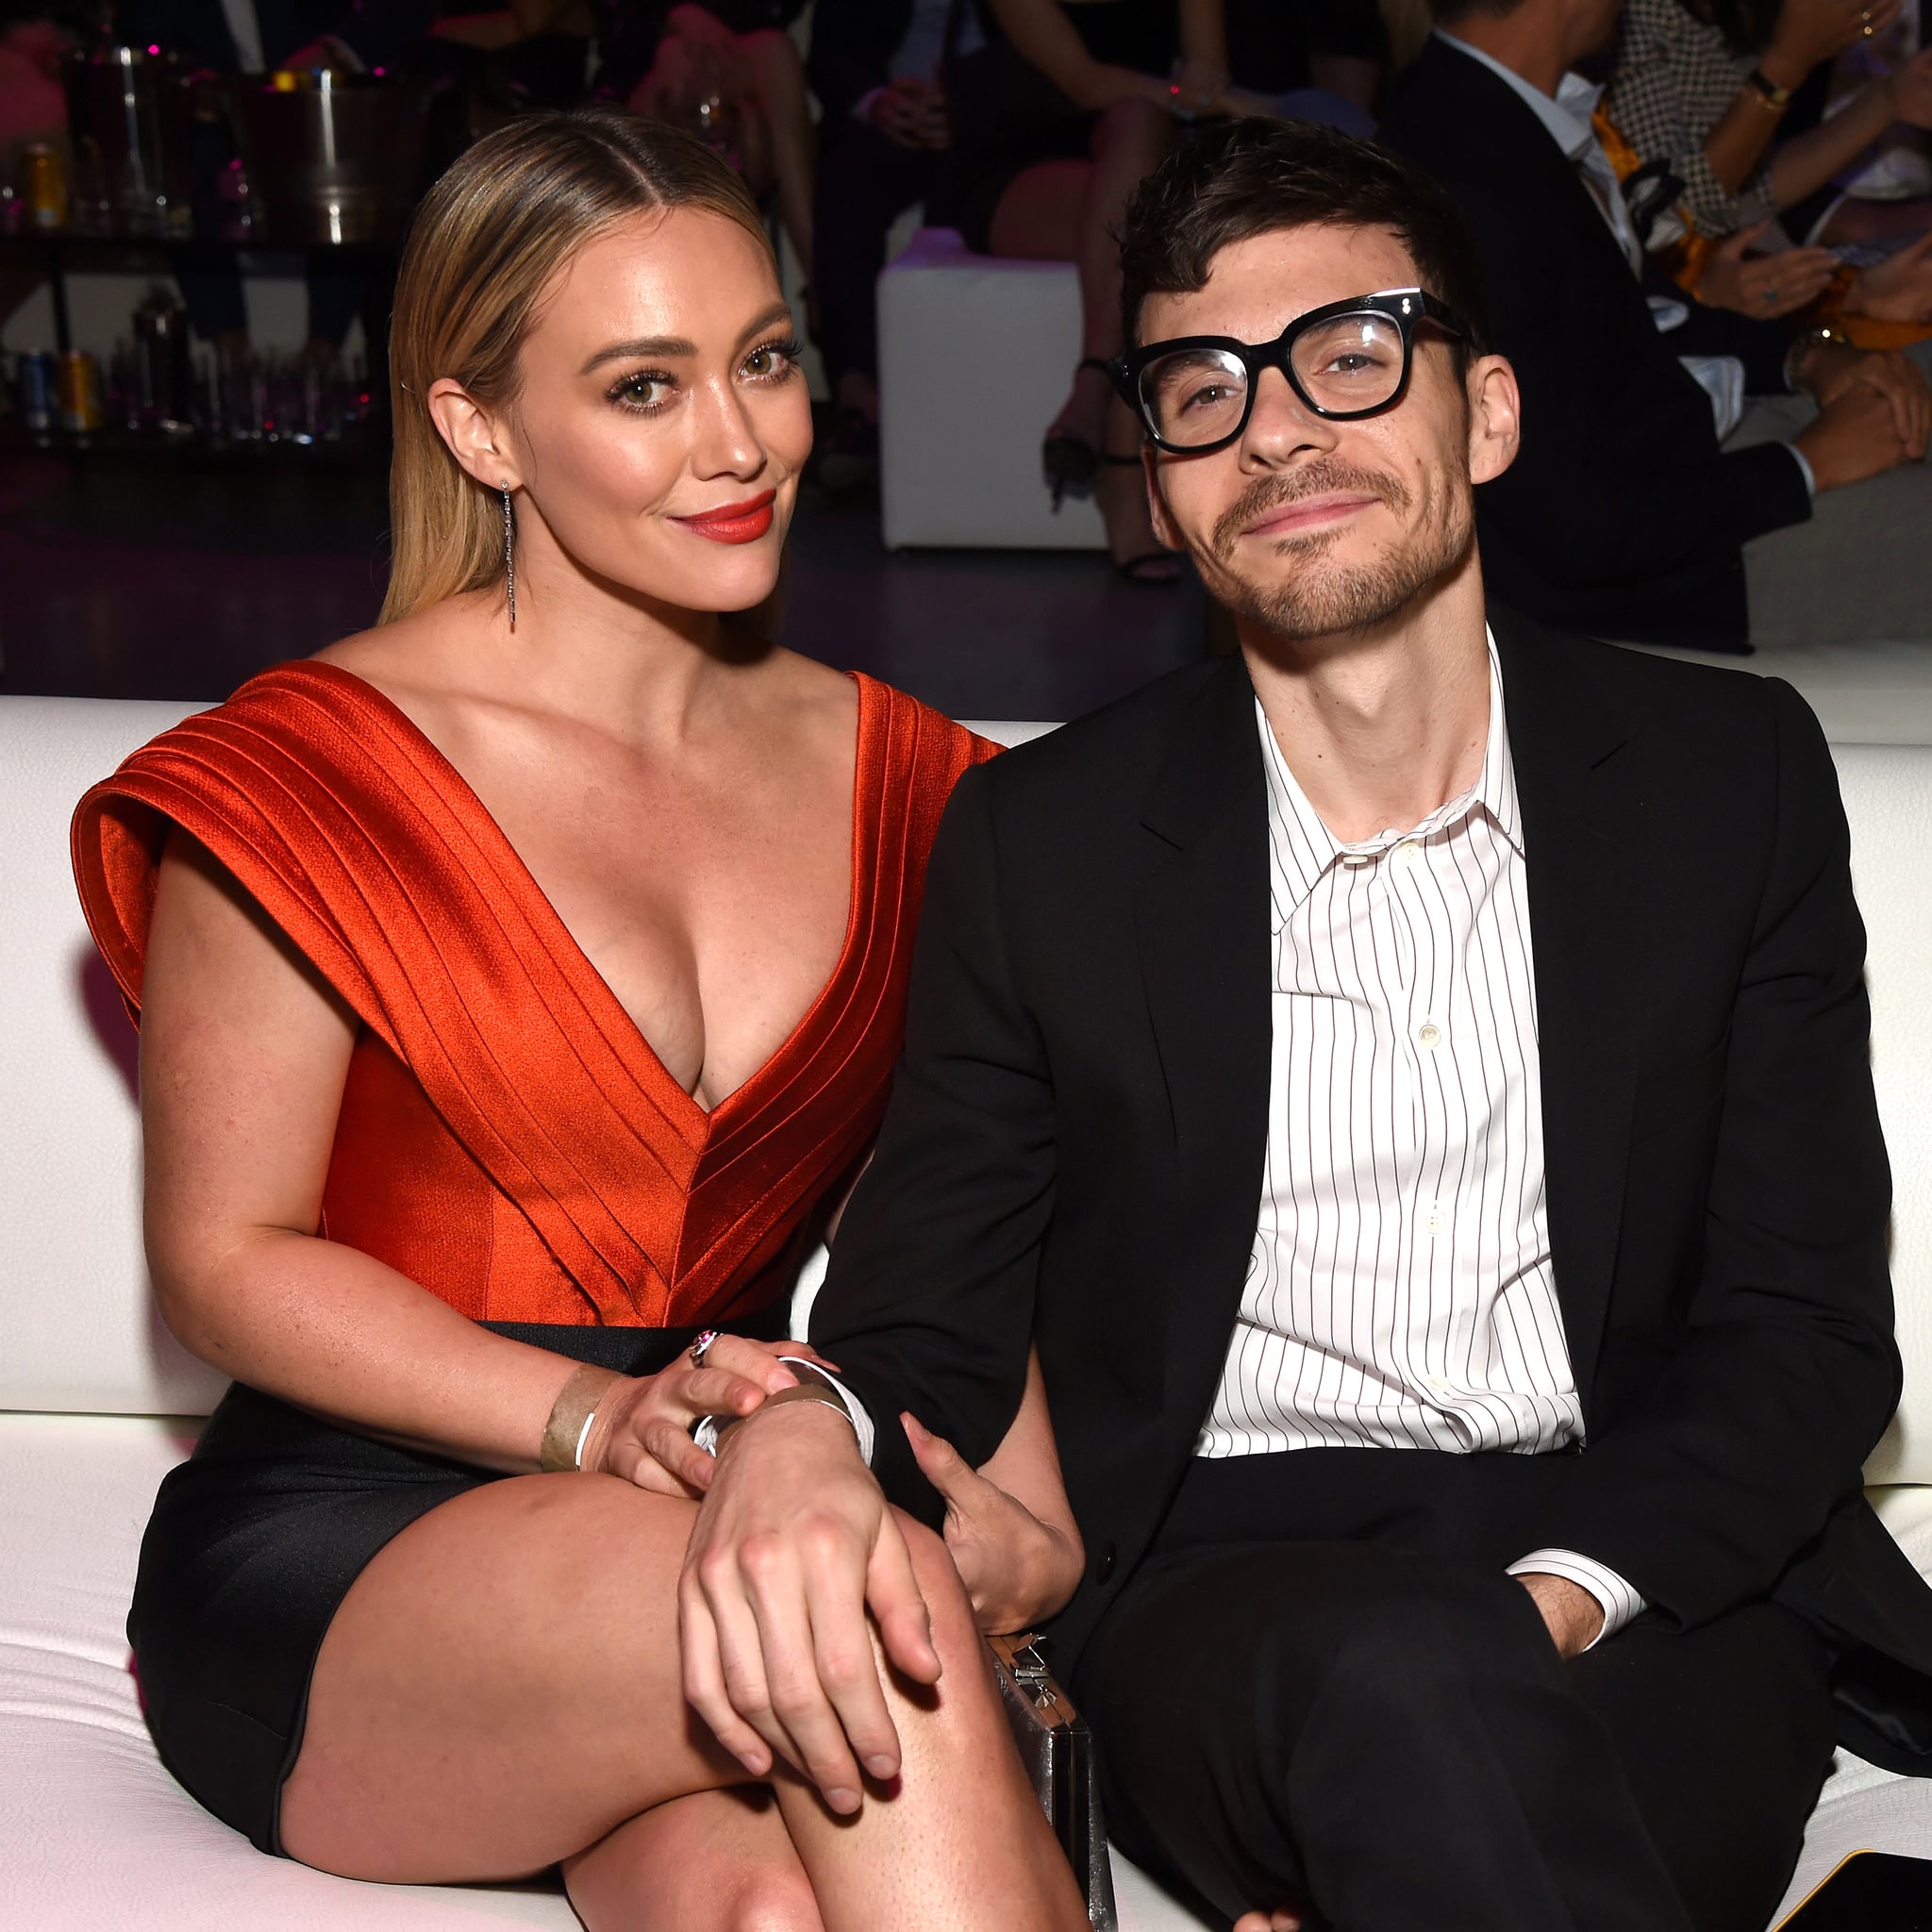 LOS ANGELES, CALIFORNIA - OCTOBER 12: (L-R) Hilary Duff and Matthew Koma attend the 5th Adopt Together Baby Ball Gala on October 12, 2019 in Los Angeles, California. (Photo by Michael Kovac/Getty Images for Adopt Together)